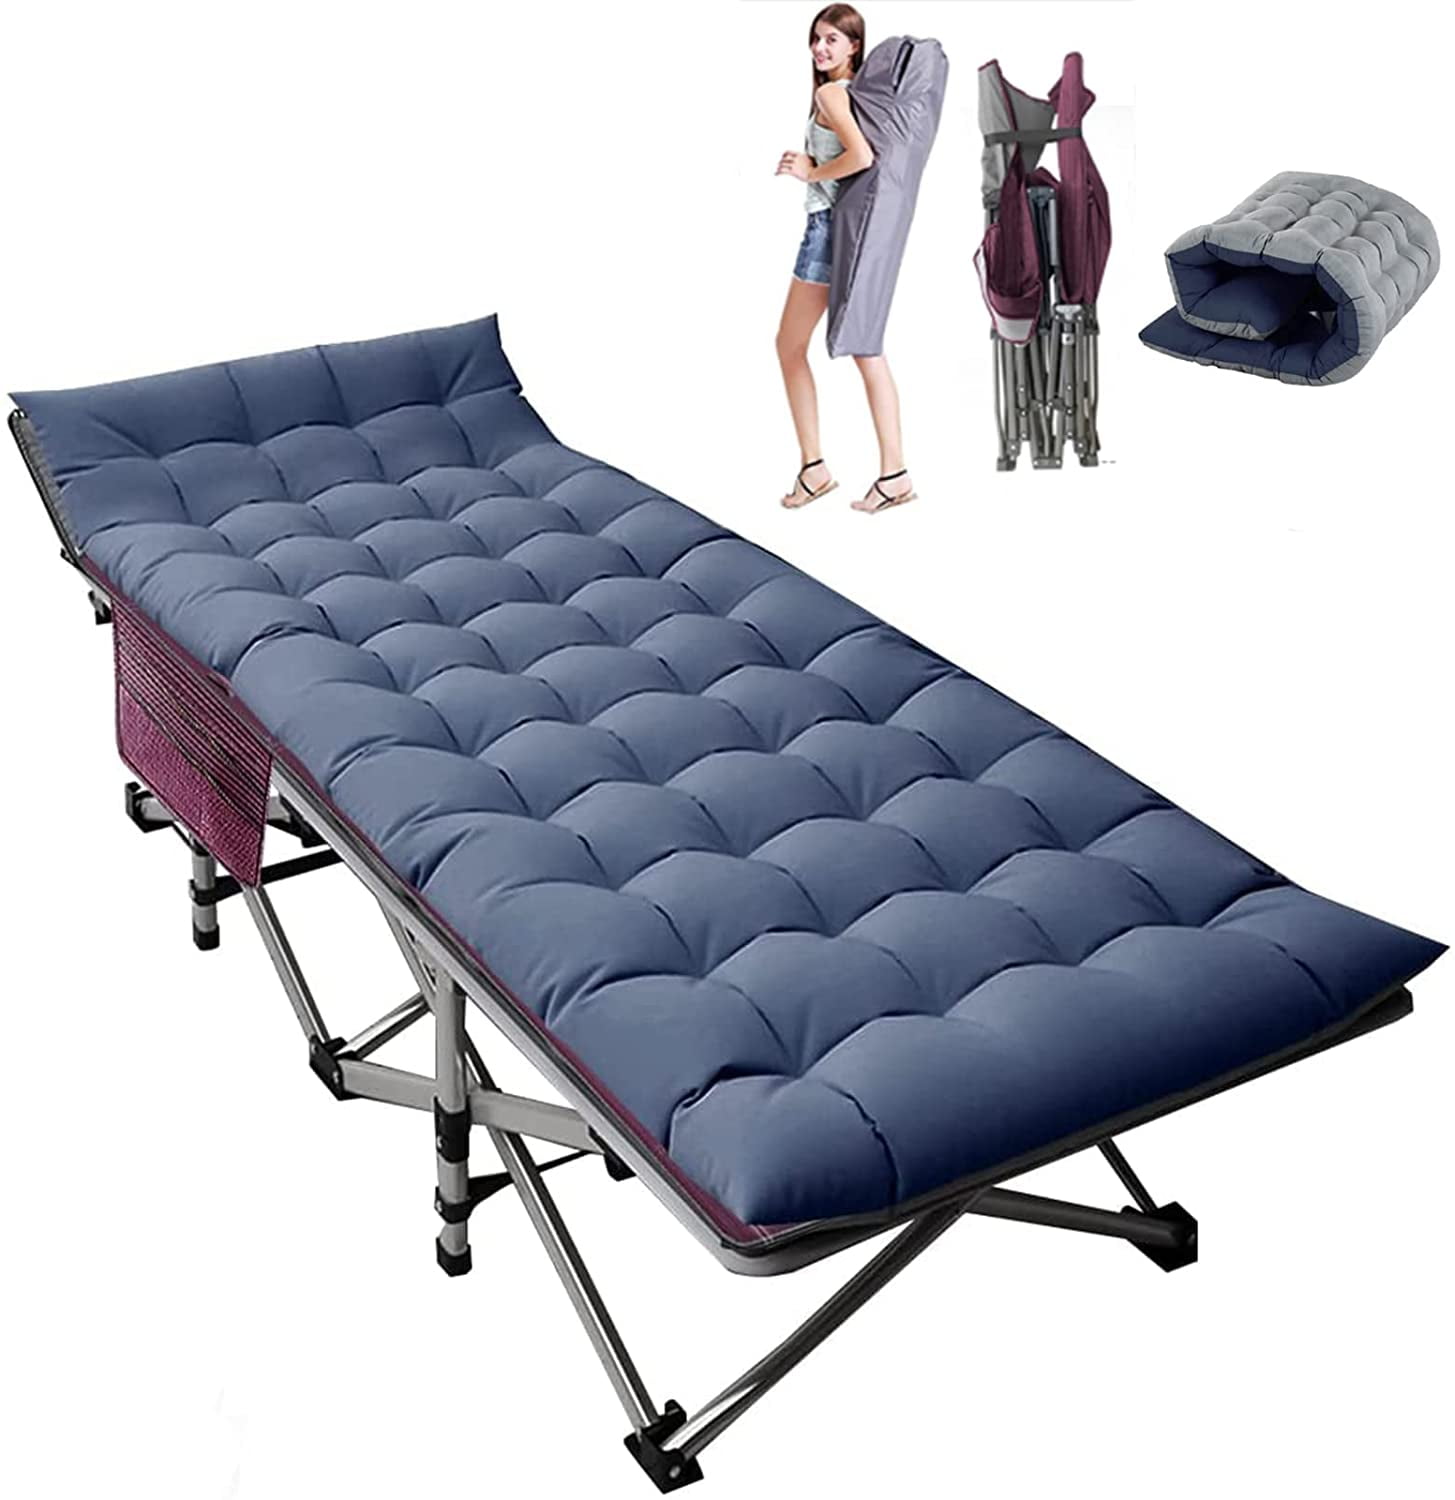 Double Layer 1200D Folding Cots Portable W/Mattress W/Carrying Bag Heavy Duty Sleeping Cots ABORON Folding Camping Cots for Adults 